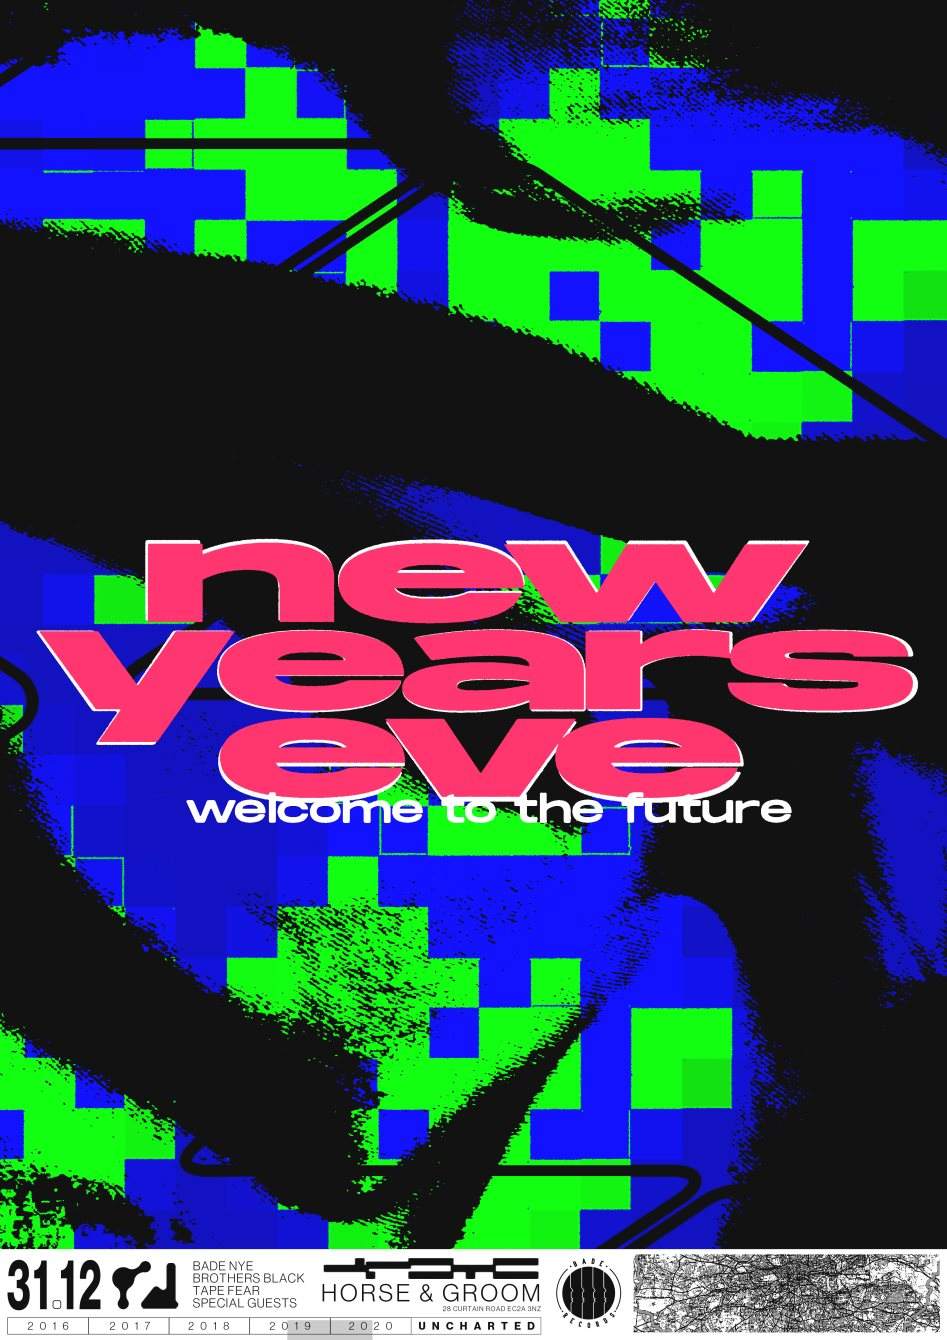 Bade NYE: Welcome to the Future - Página frontal